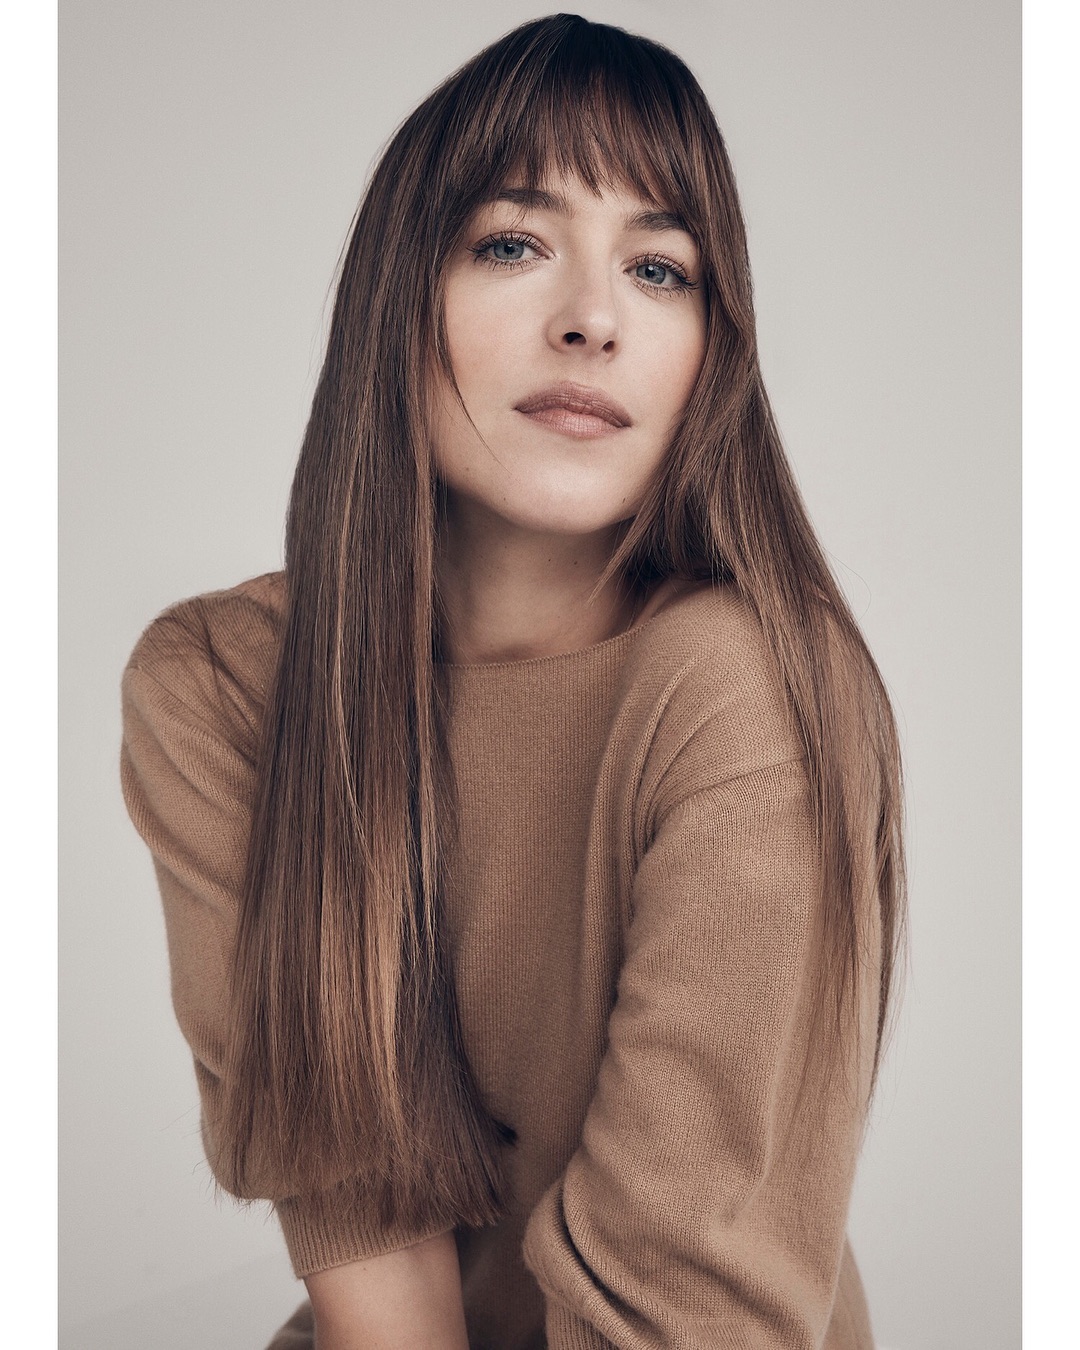 Dakota Johnson & Riley Keough To Topline Limited Series ‘Cult Following’ In Works At Platform One